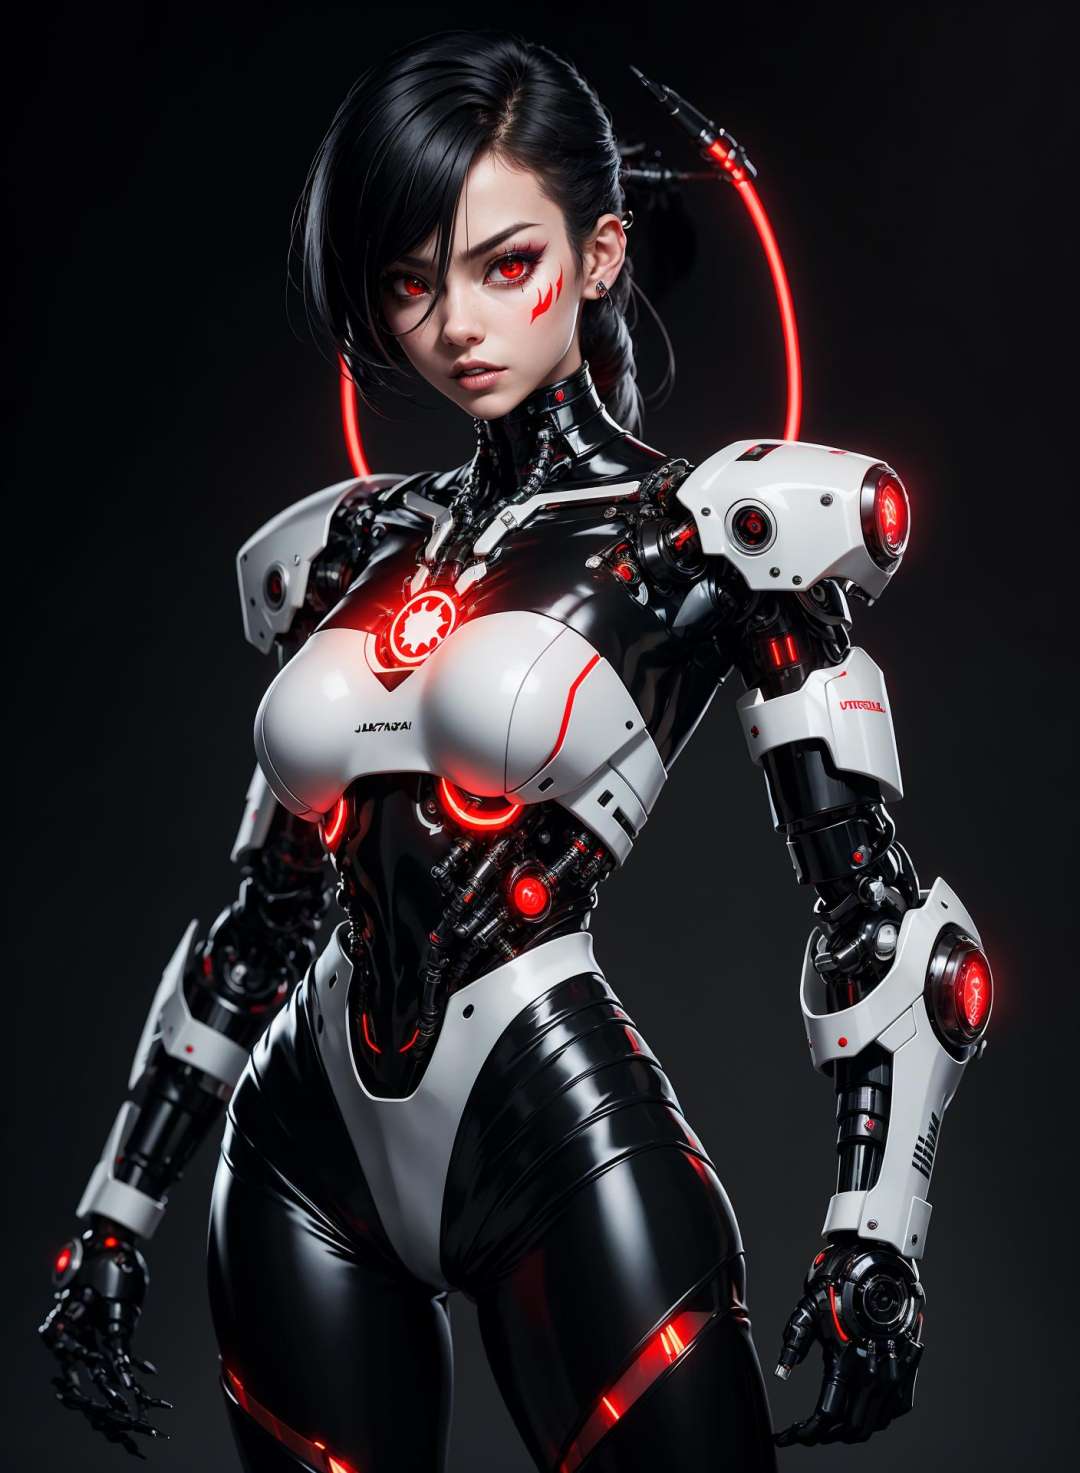 nijistyle, full body of cyborg lady, cybernetic jaw, mechanical parts, white shirt, unbottoned, black latex skirt, metal skin, glowing red eyes, cables, wires, black hair, simple background